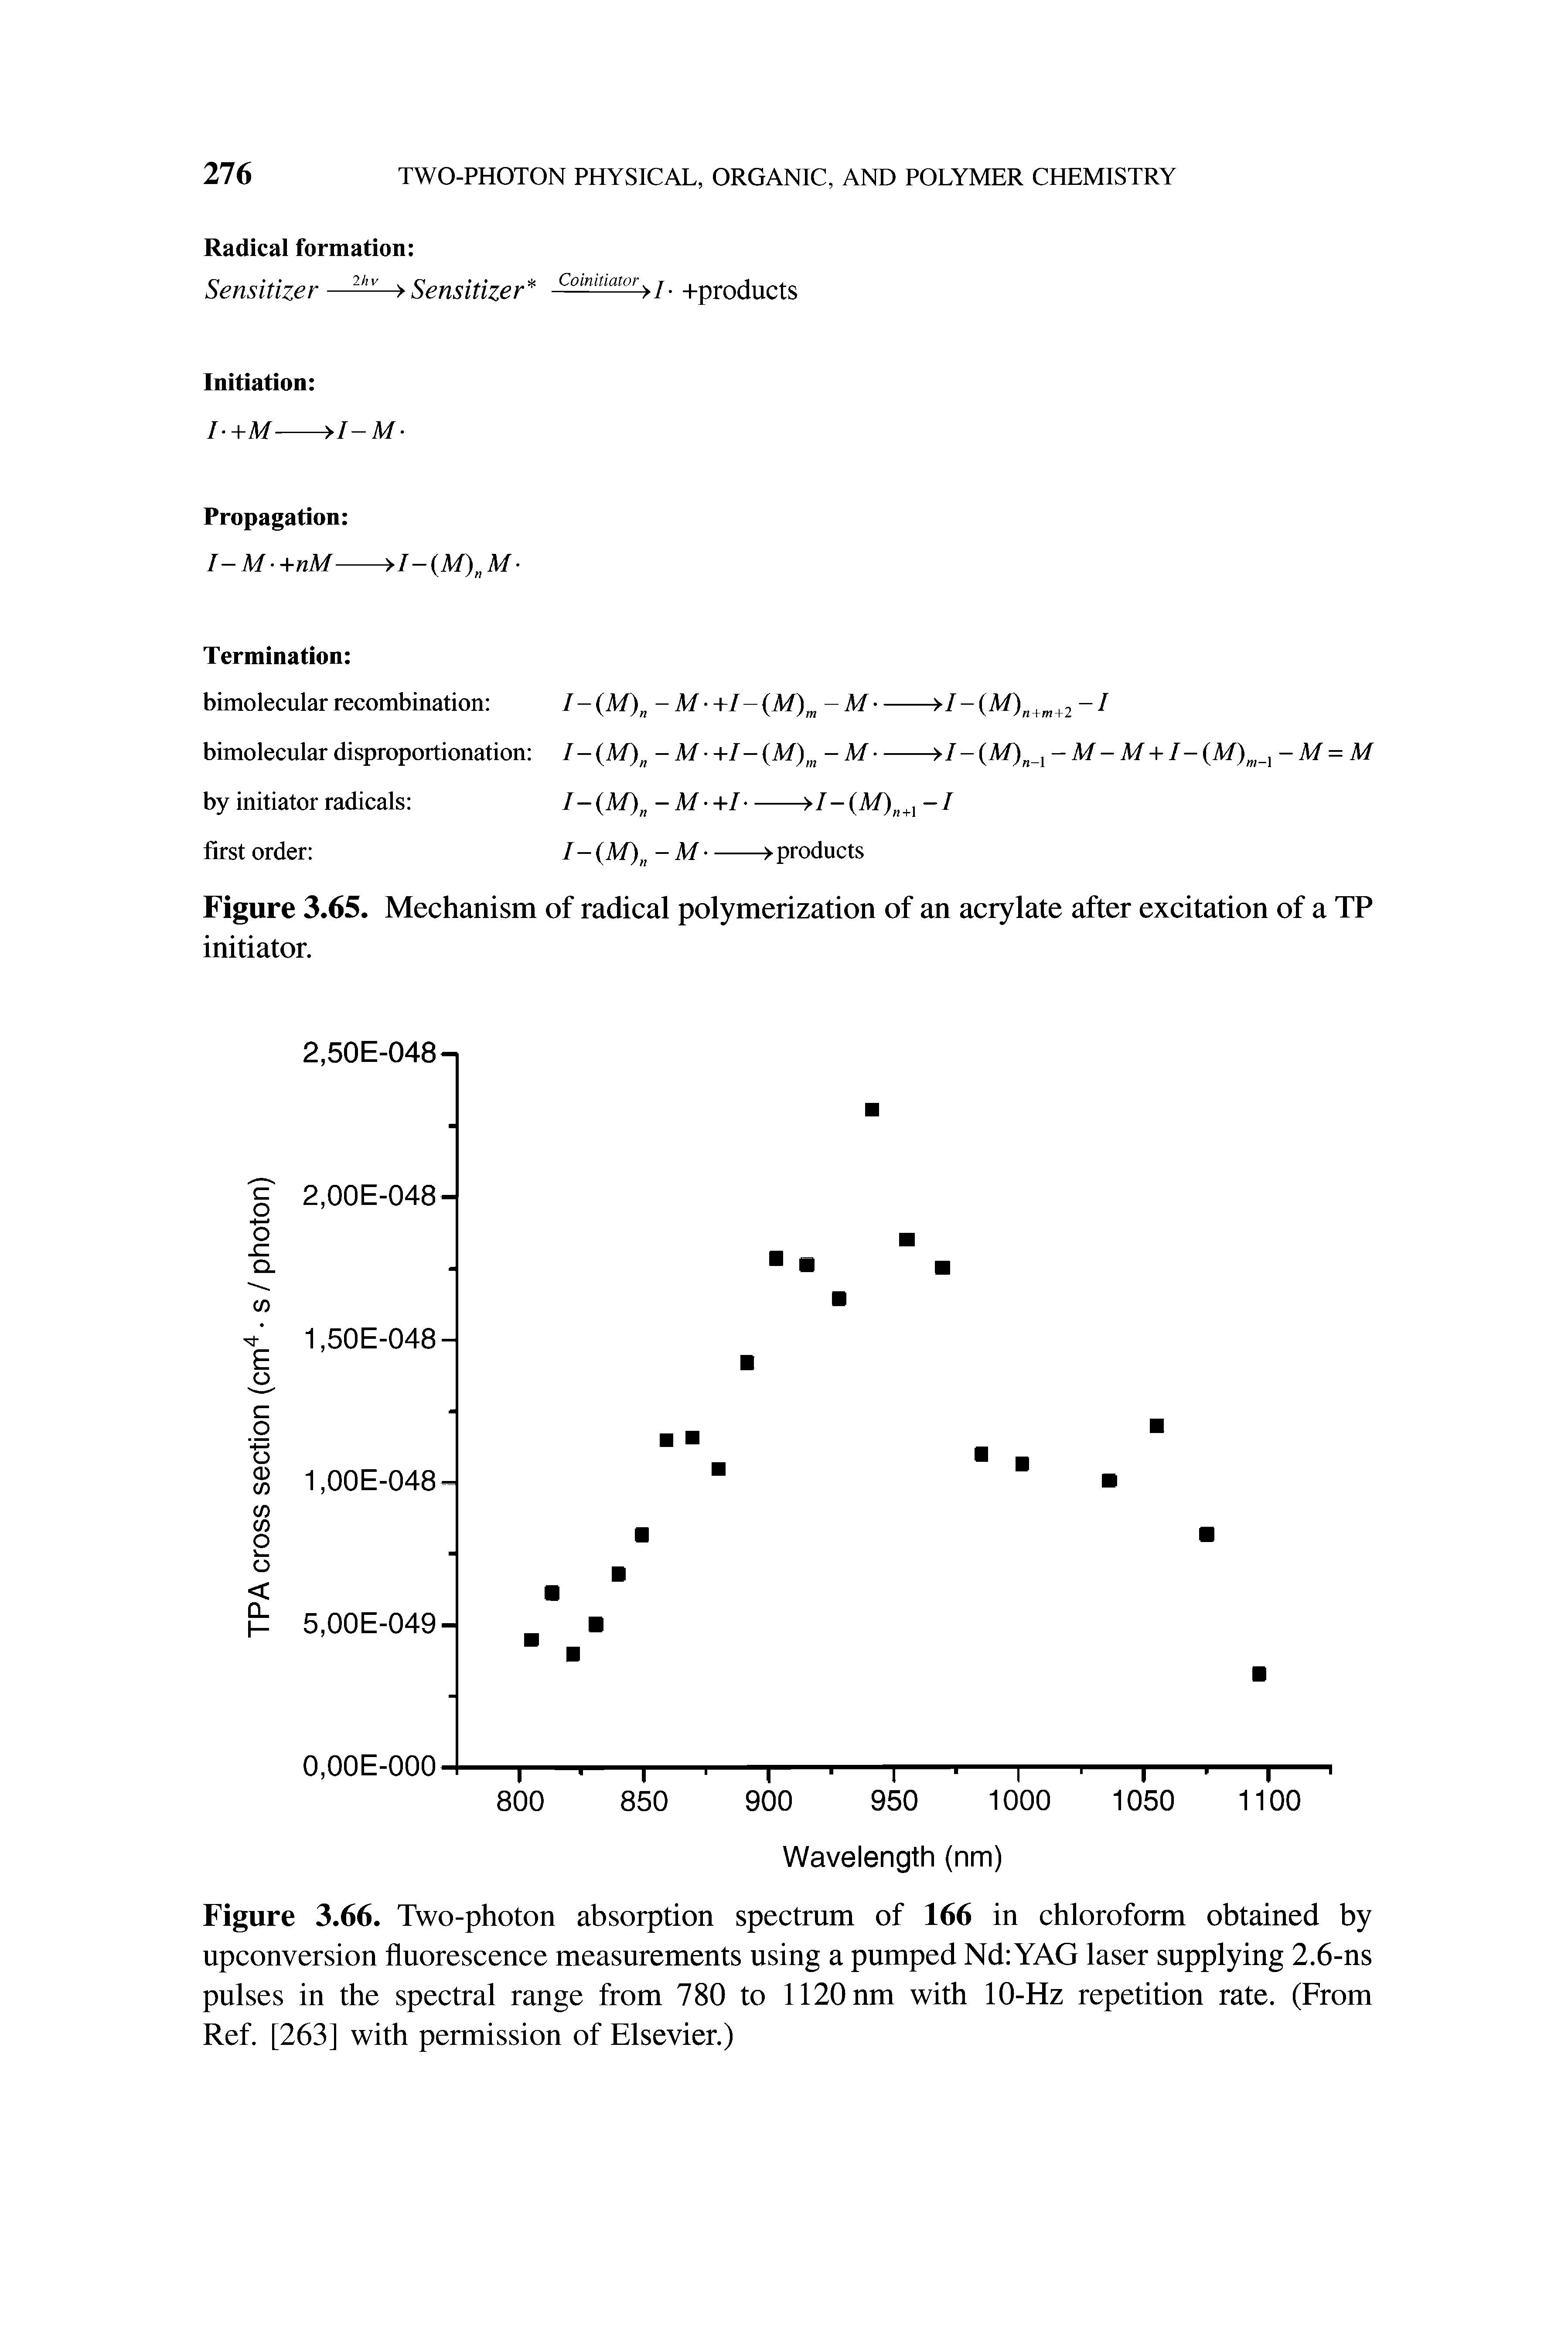 Figure 3.66. Two-photon absorption spectrum of 166 in chloroform obtained by upconversion fluorescence measurements using a pumped Nd YAG laser supplying 2.6-ns pulses in the spectral range from 780 to 1120nm with 10-Hz repetition rate. (From Ref. [263] with permission of Elsevier.)...